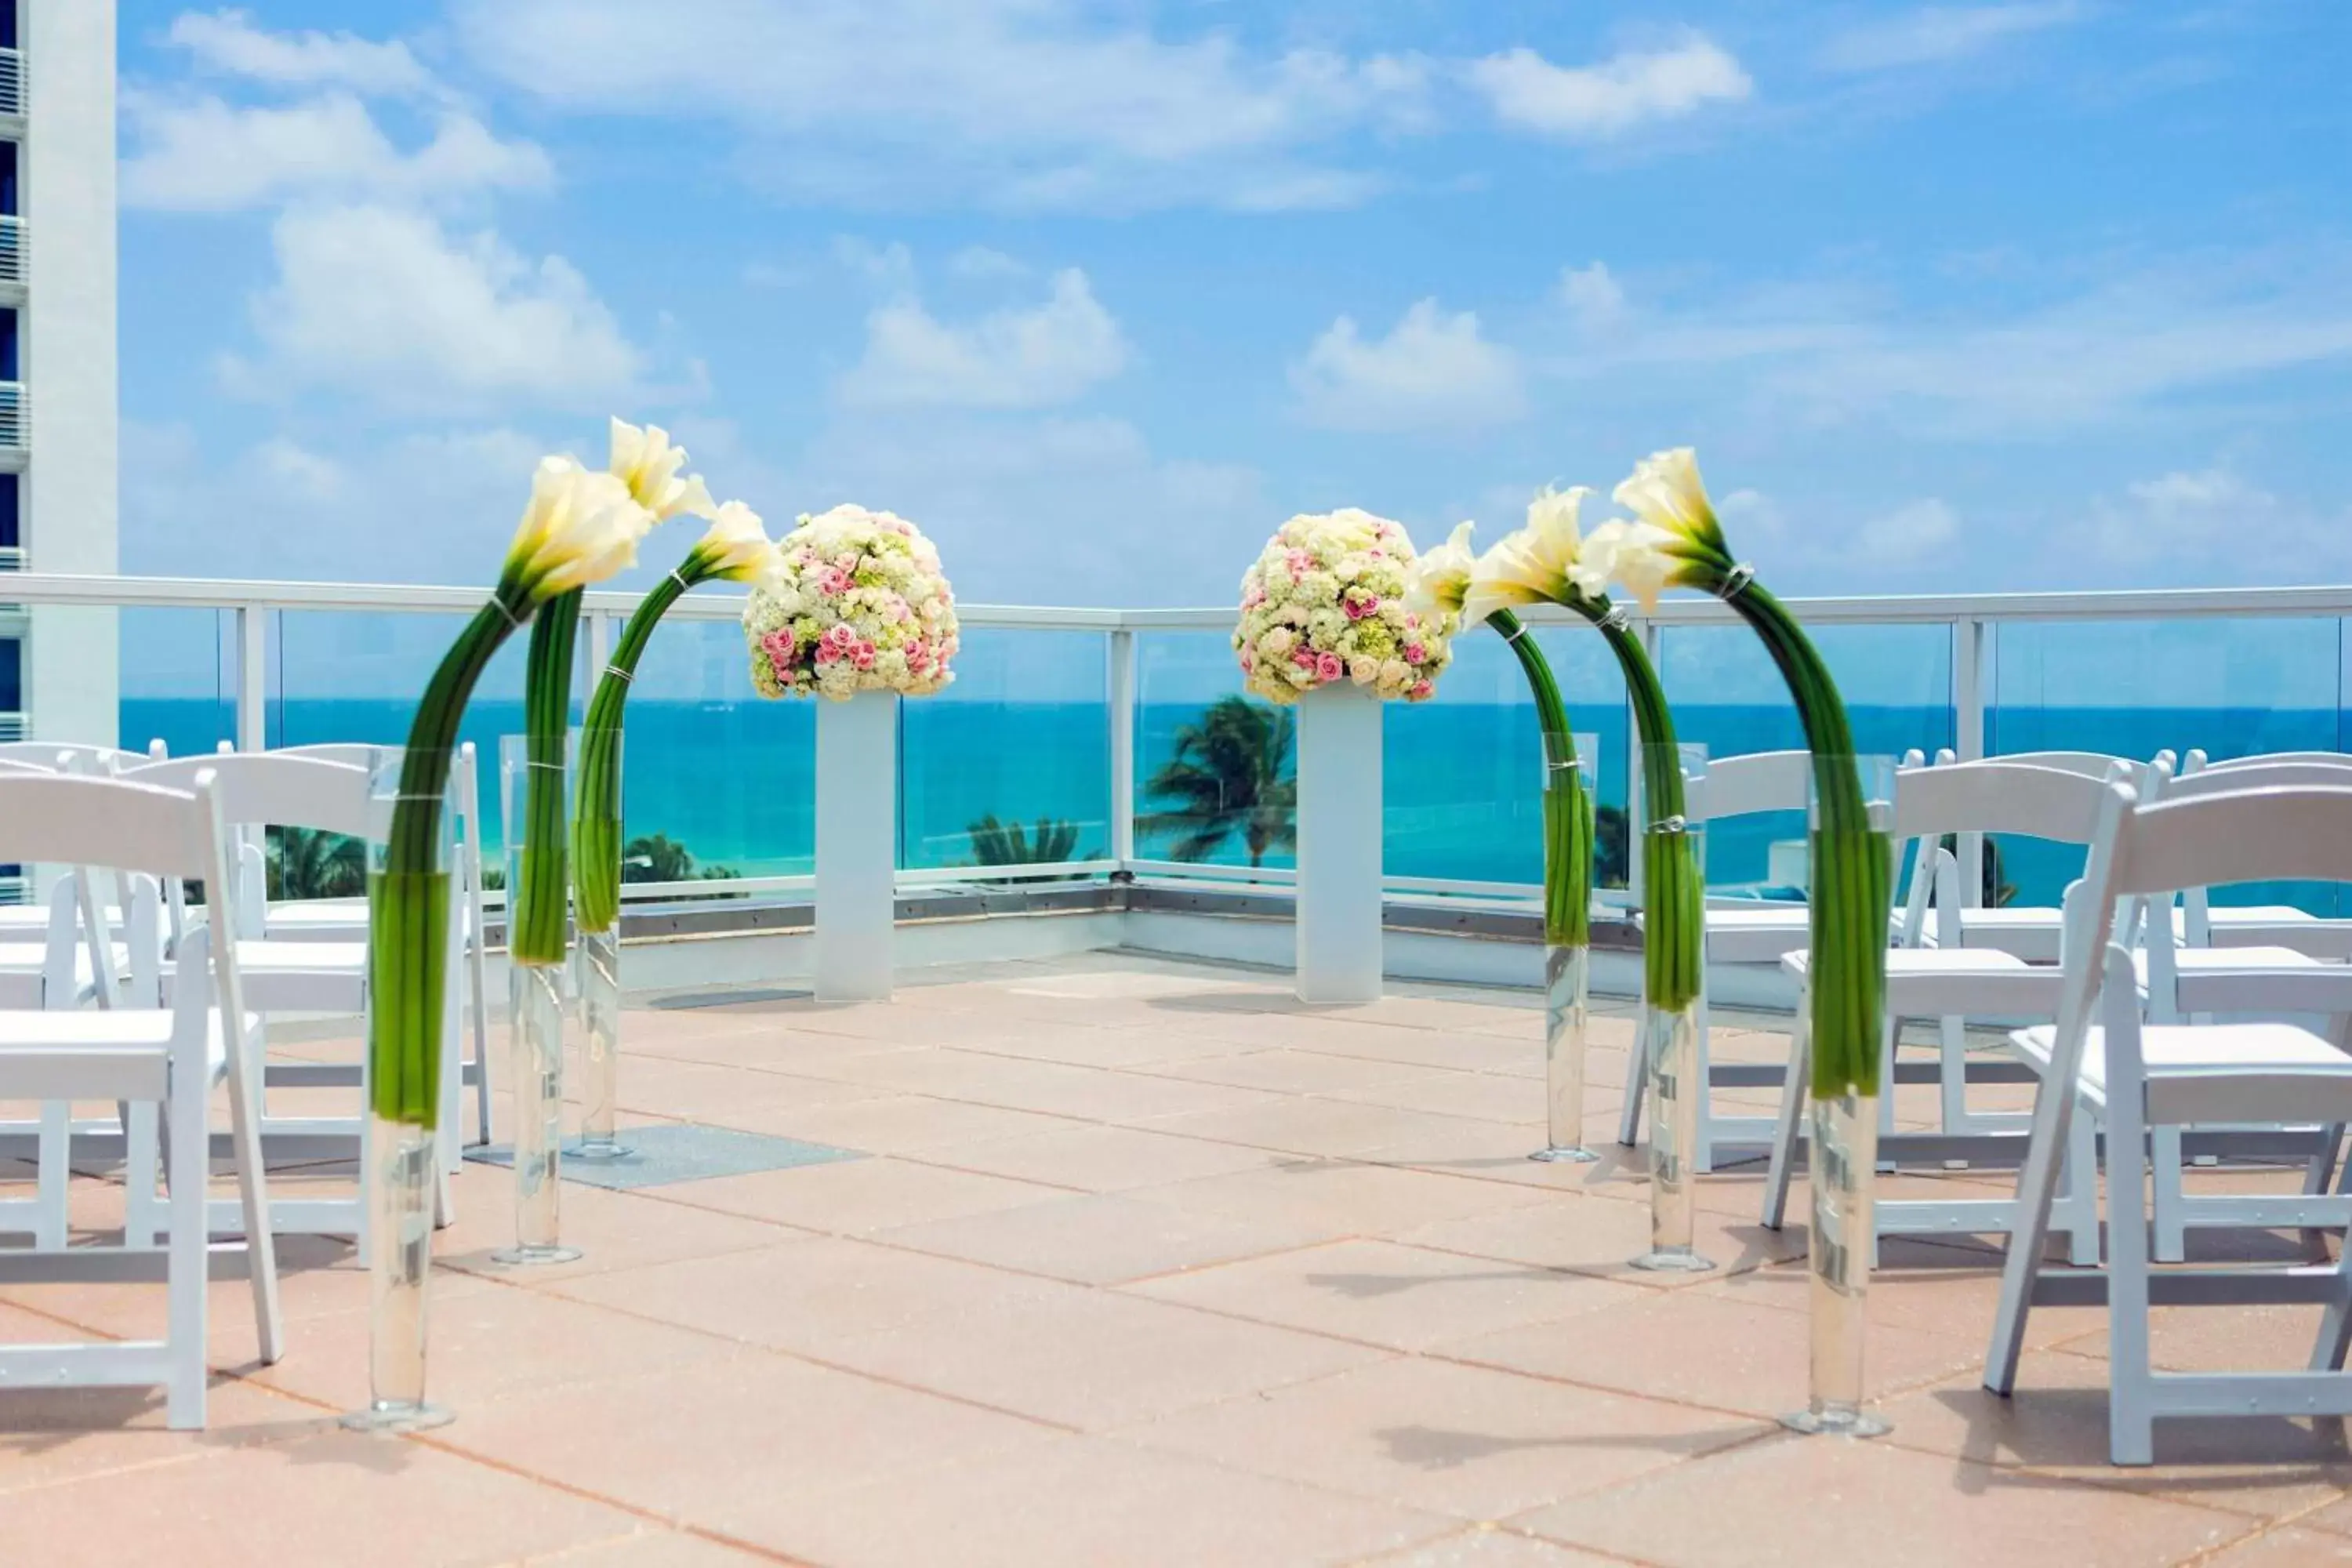 Other, Banquet Facilities in The Westin Fort Lauderdale Beach Resort